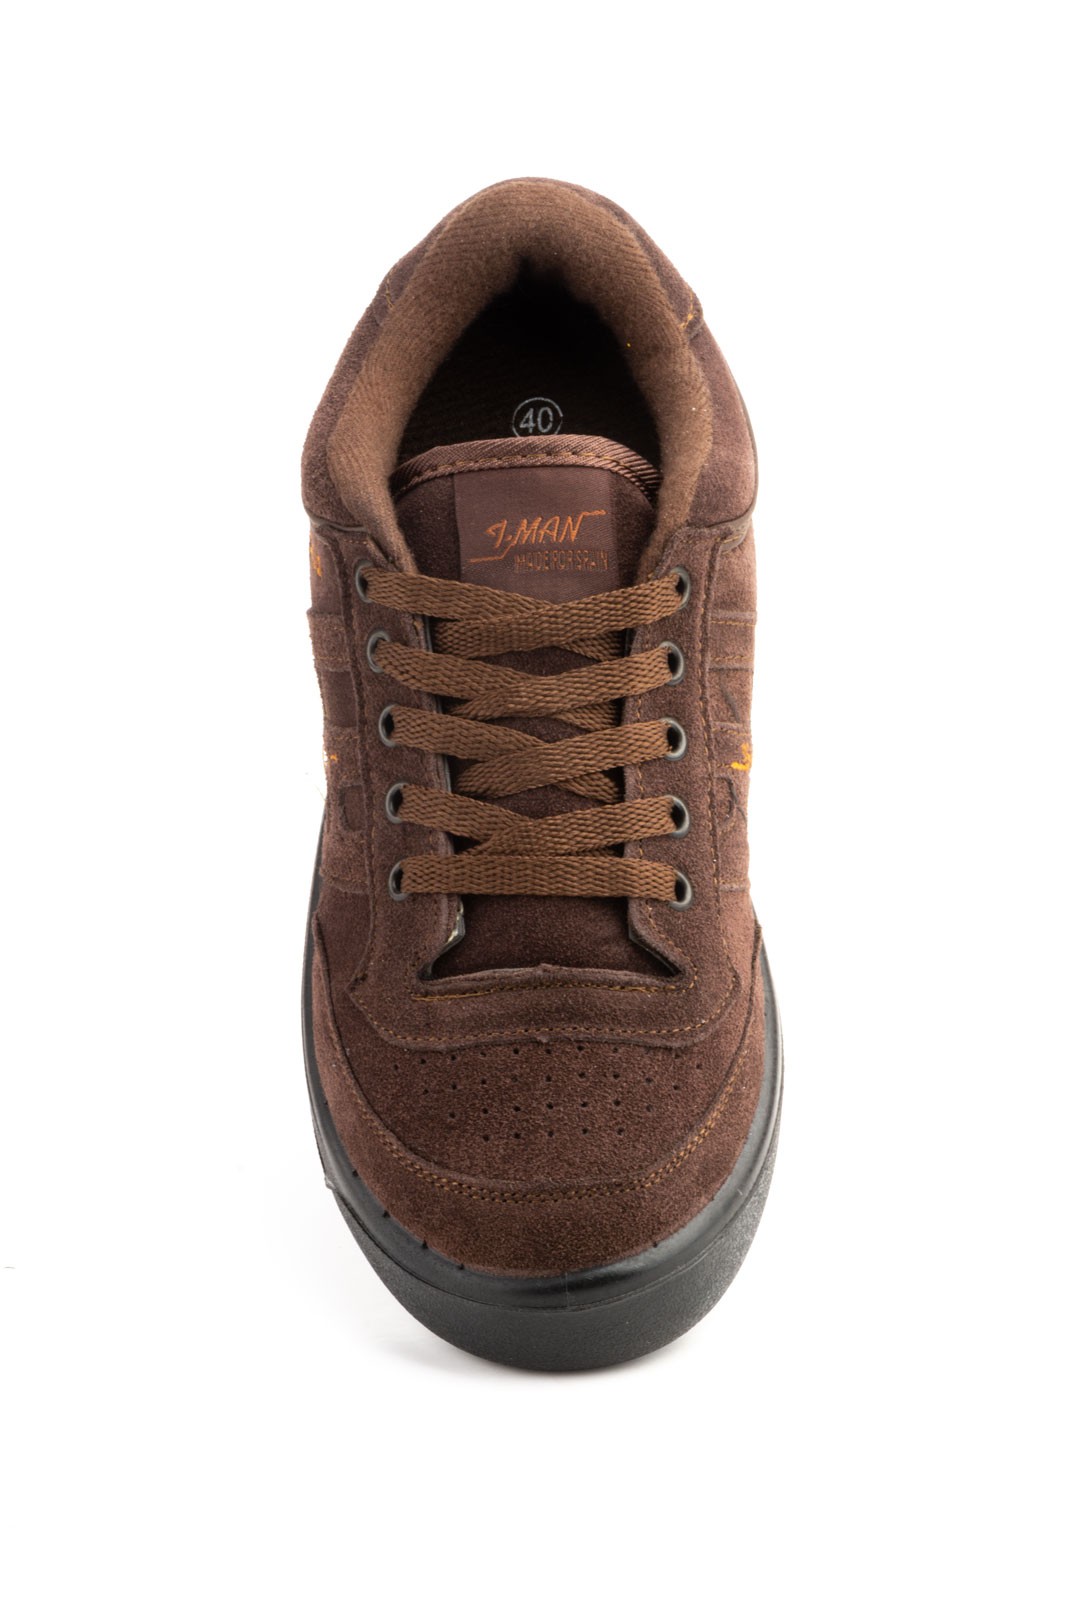 Brown split leather paredes sports shoes